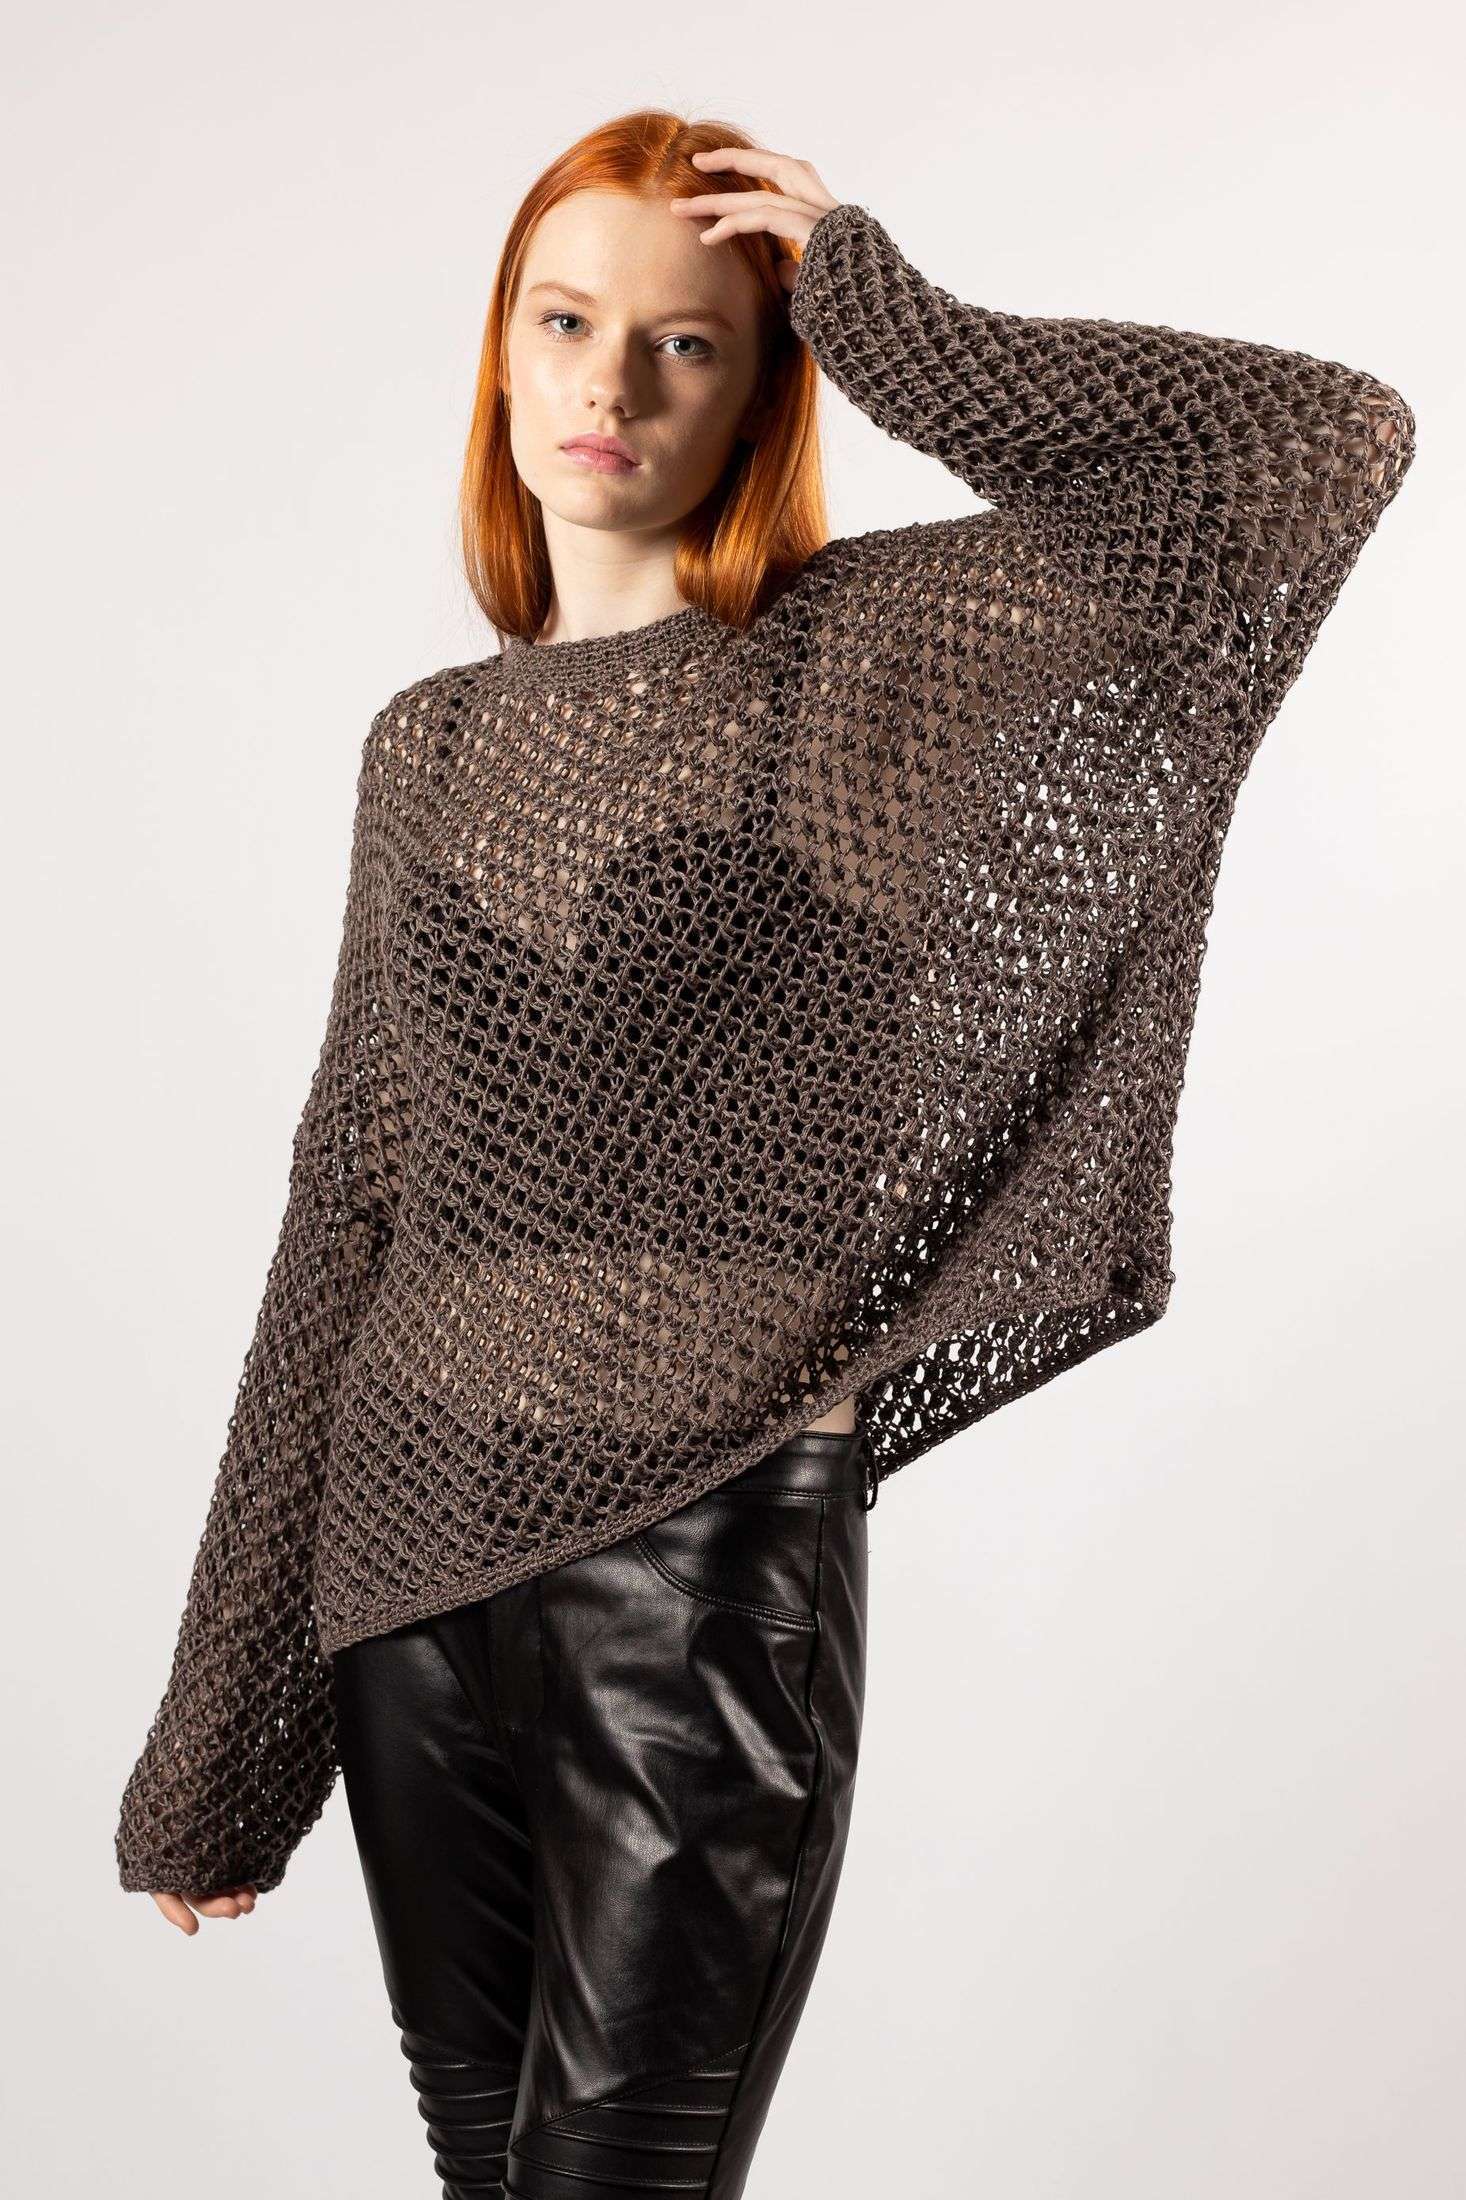 Stay on-trend with this brown linen sweater showcasing a modern mesh pattern for a unique style statement.